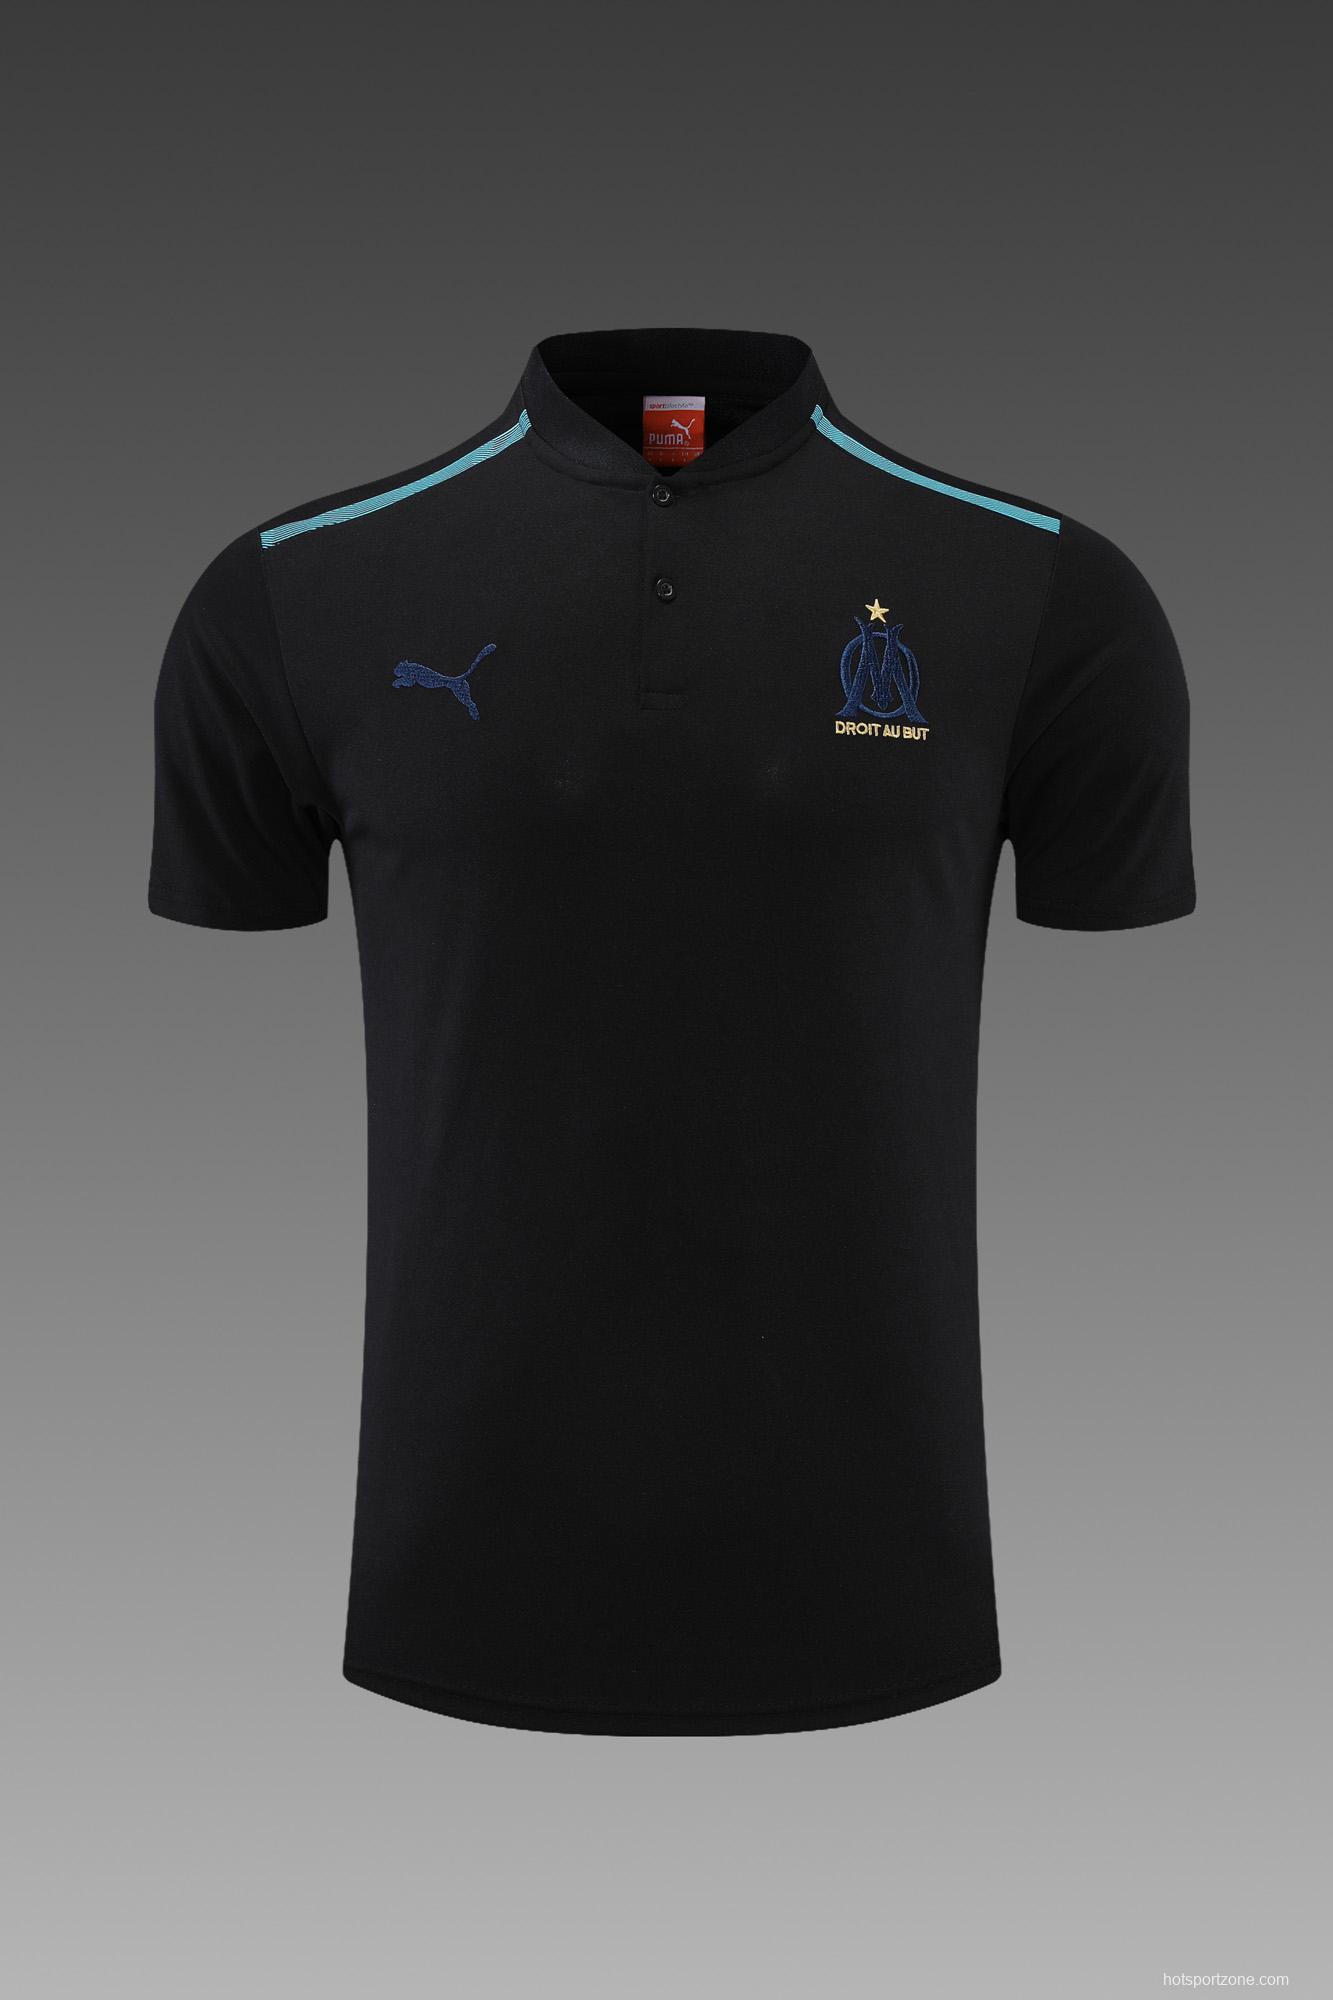 Olympique de MarseillePOLO kit Black (not supported to be sold separately)